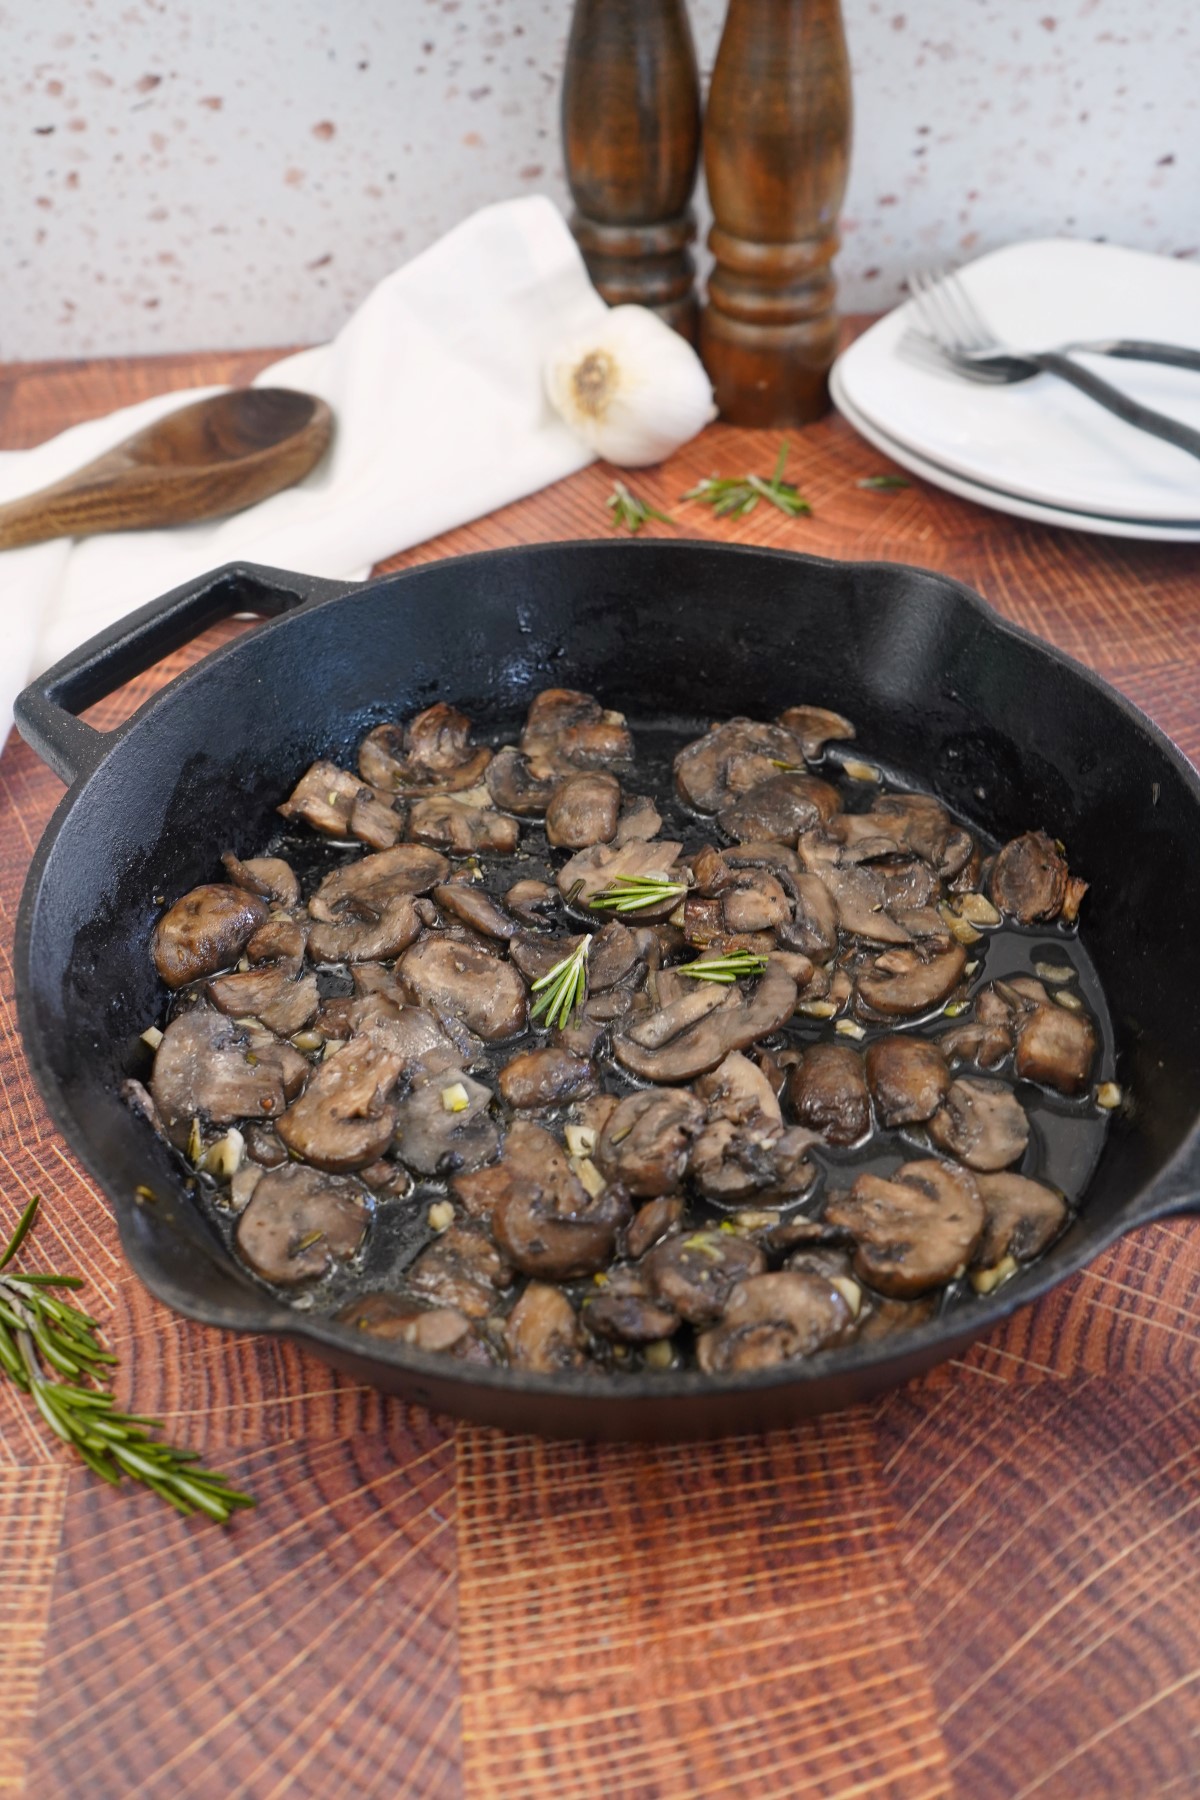 Rosemary Smoked Mushrooms in a cast iron skillet.